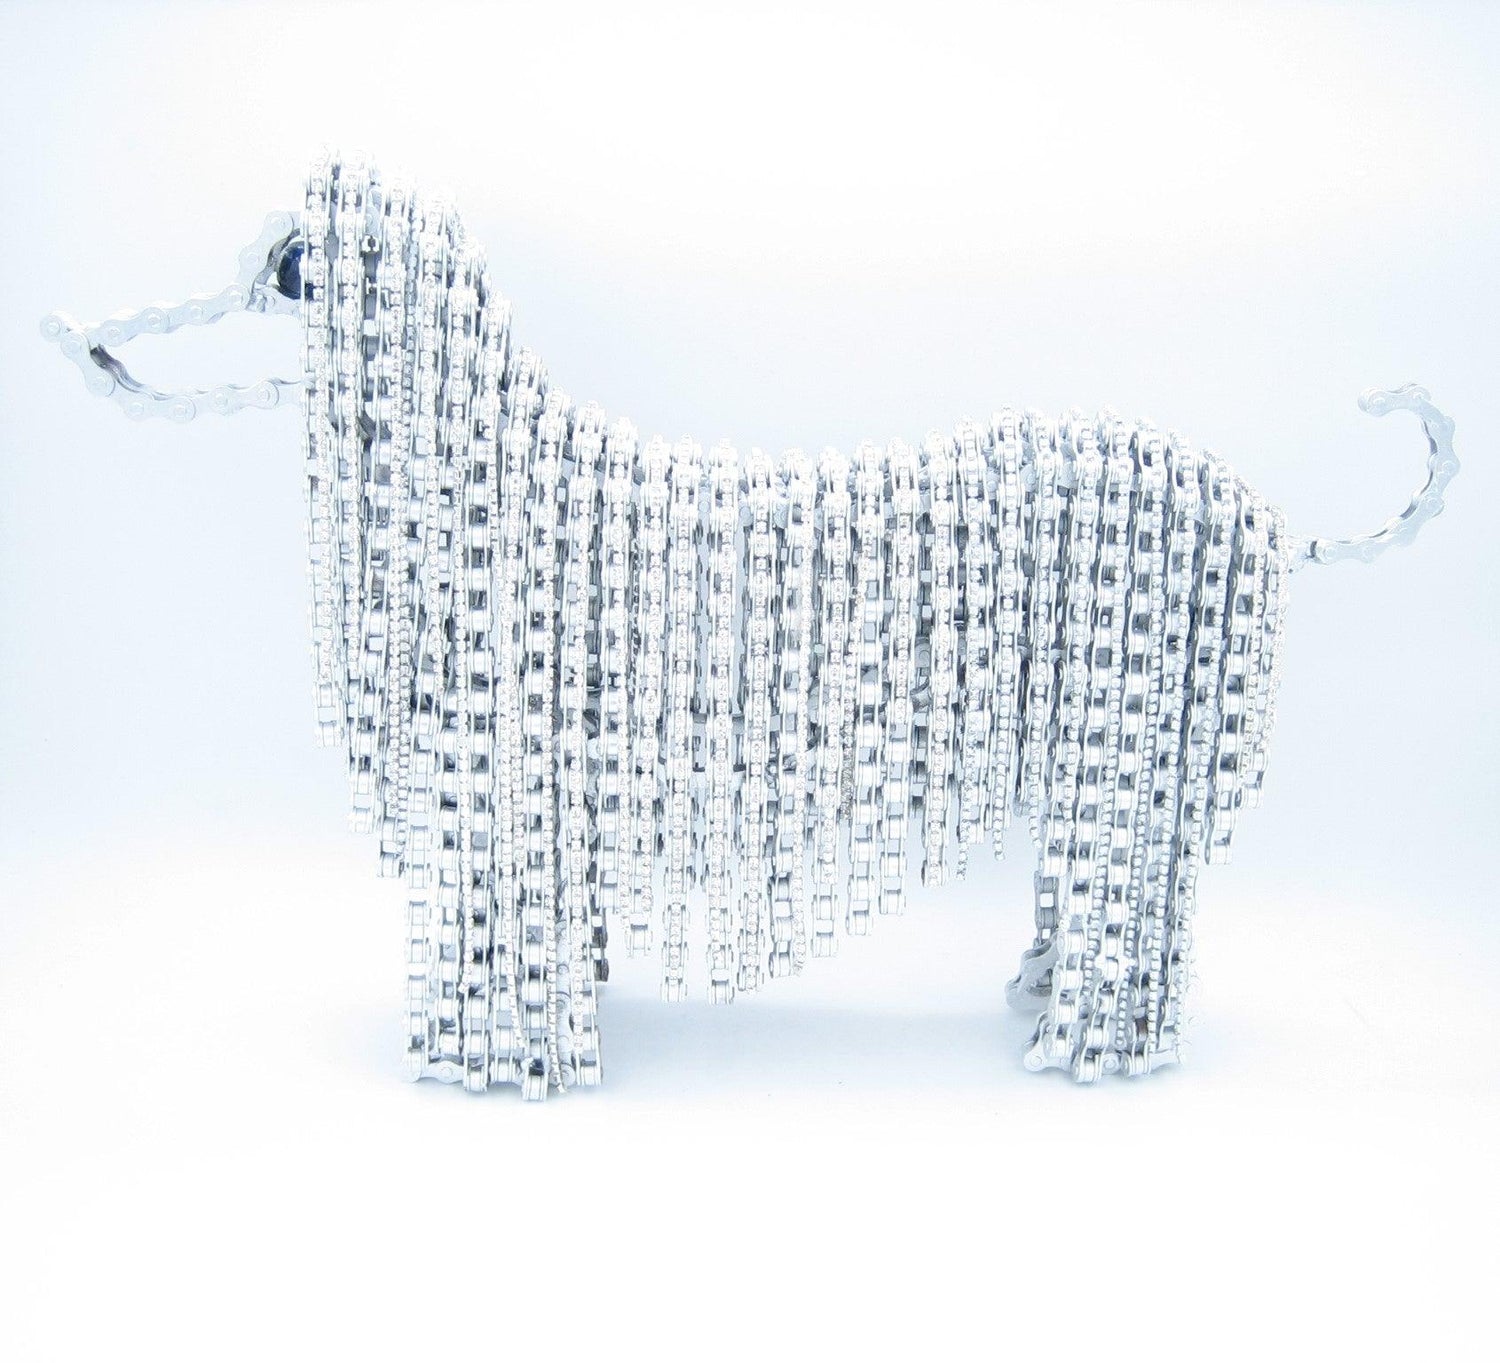 Afghan Hound Dog Sculpture (Princess) | UNCHAINED by NIRIT LEVAV PACKER